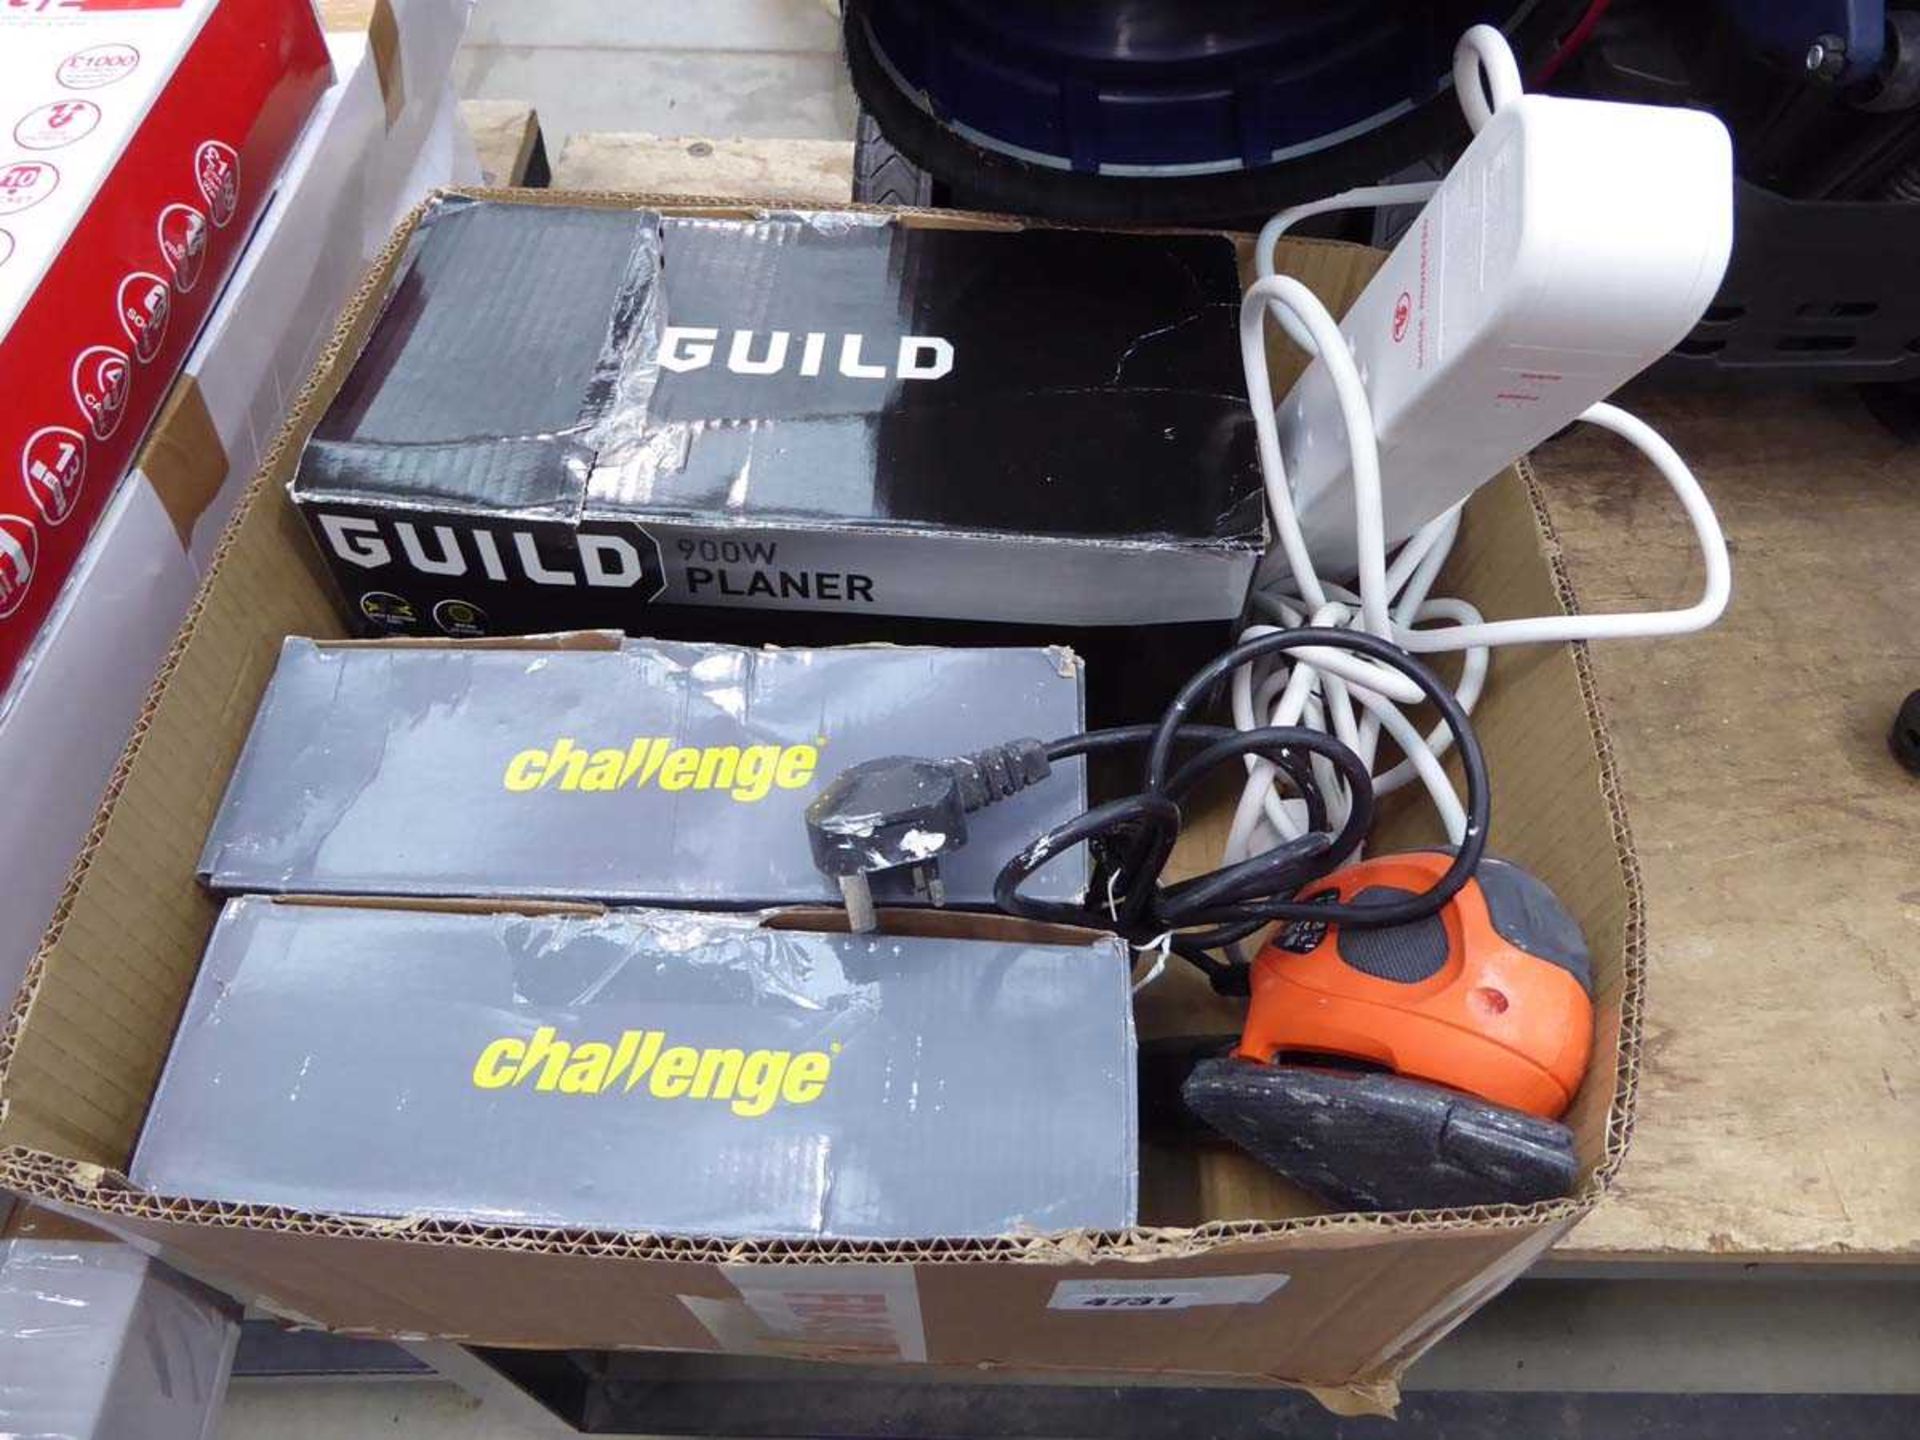 +VAT Box containing Black+Decker mouse, Challenge Founders Guild planer and extension cable